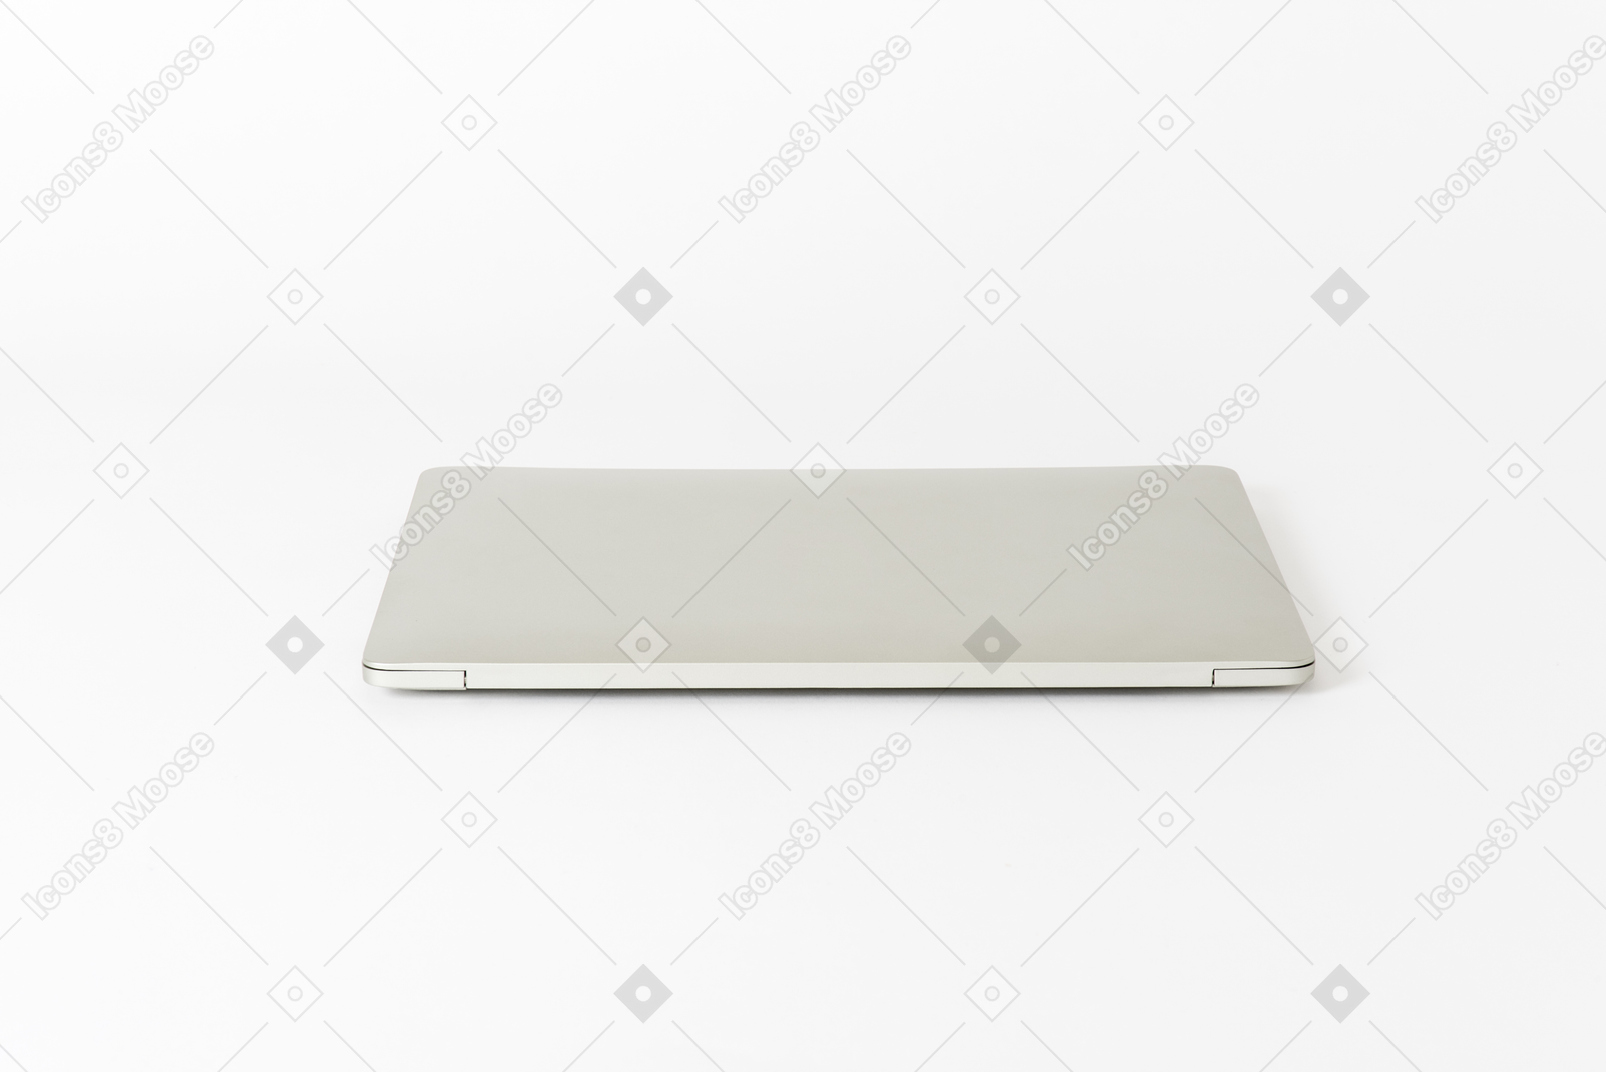 Closed laptop on a table